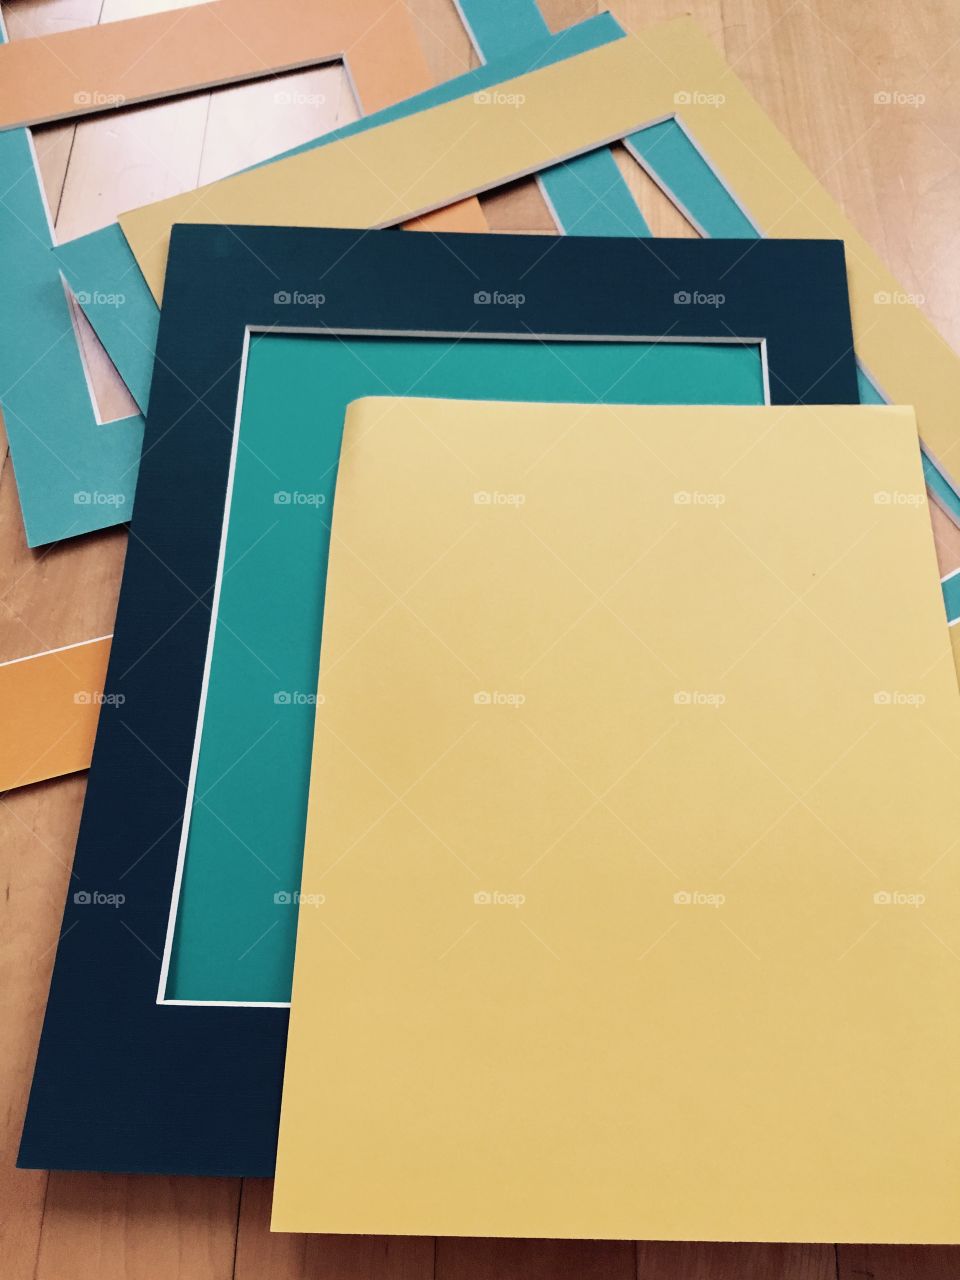 Preparing to craft with colored paper and frame